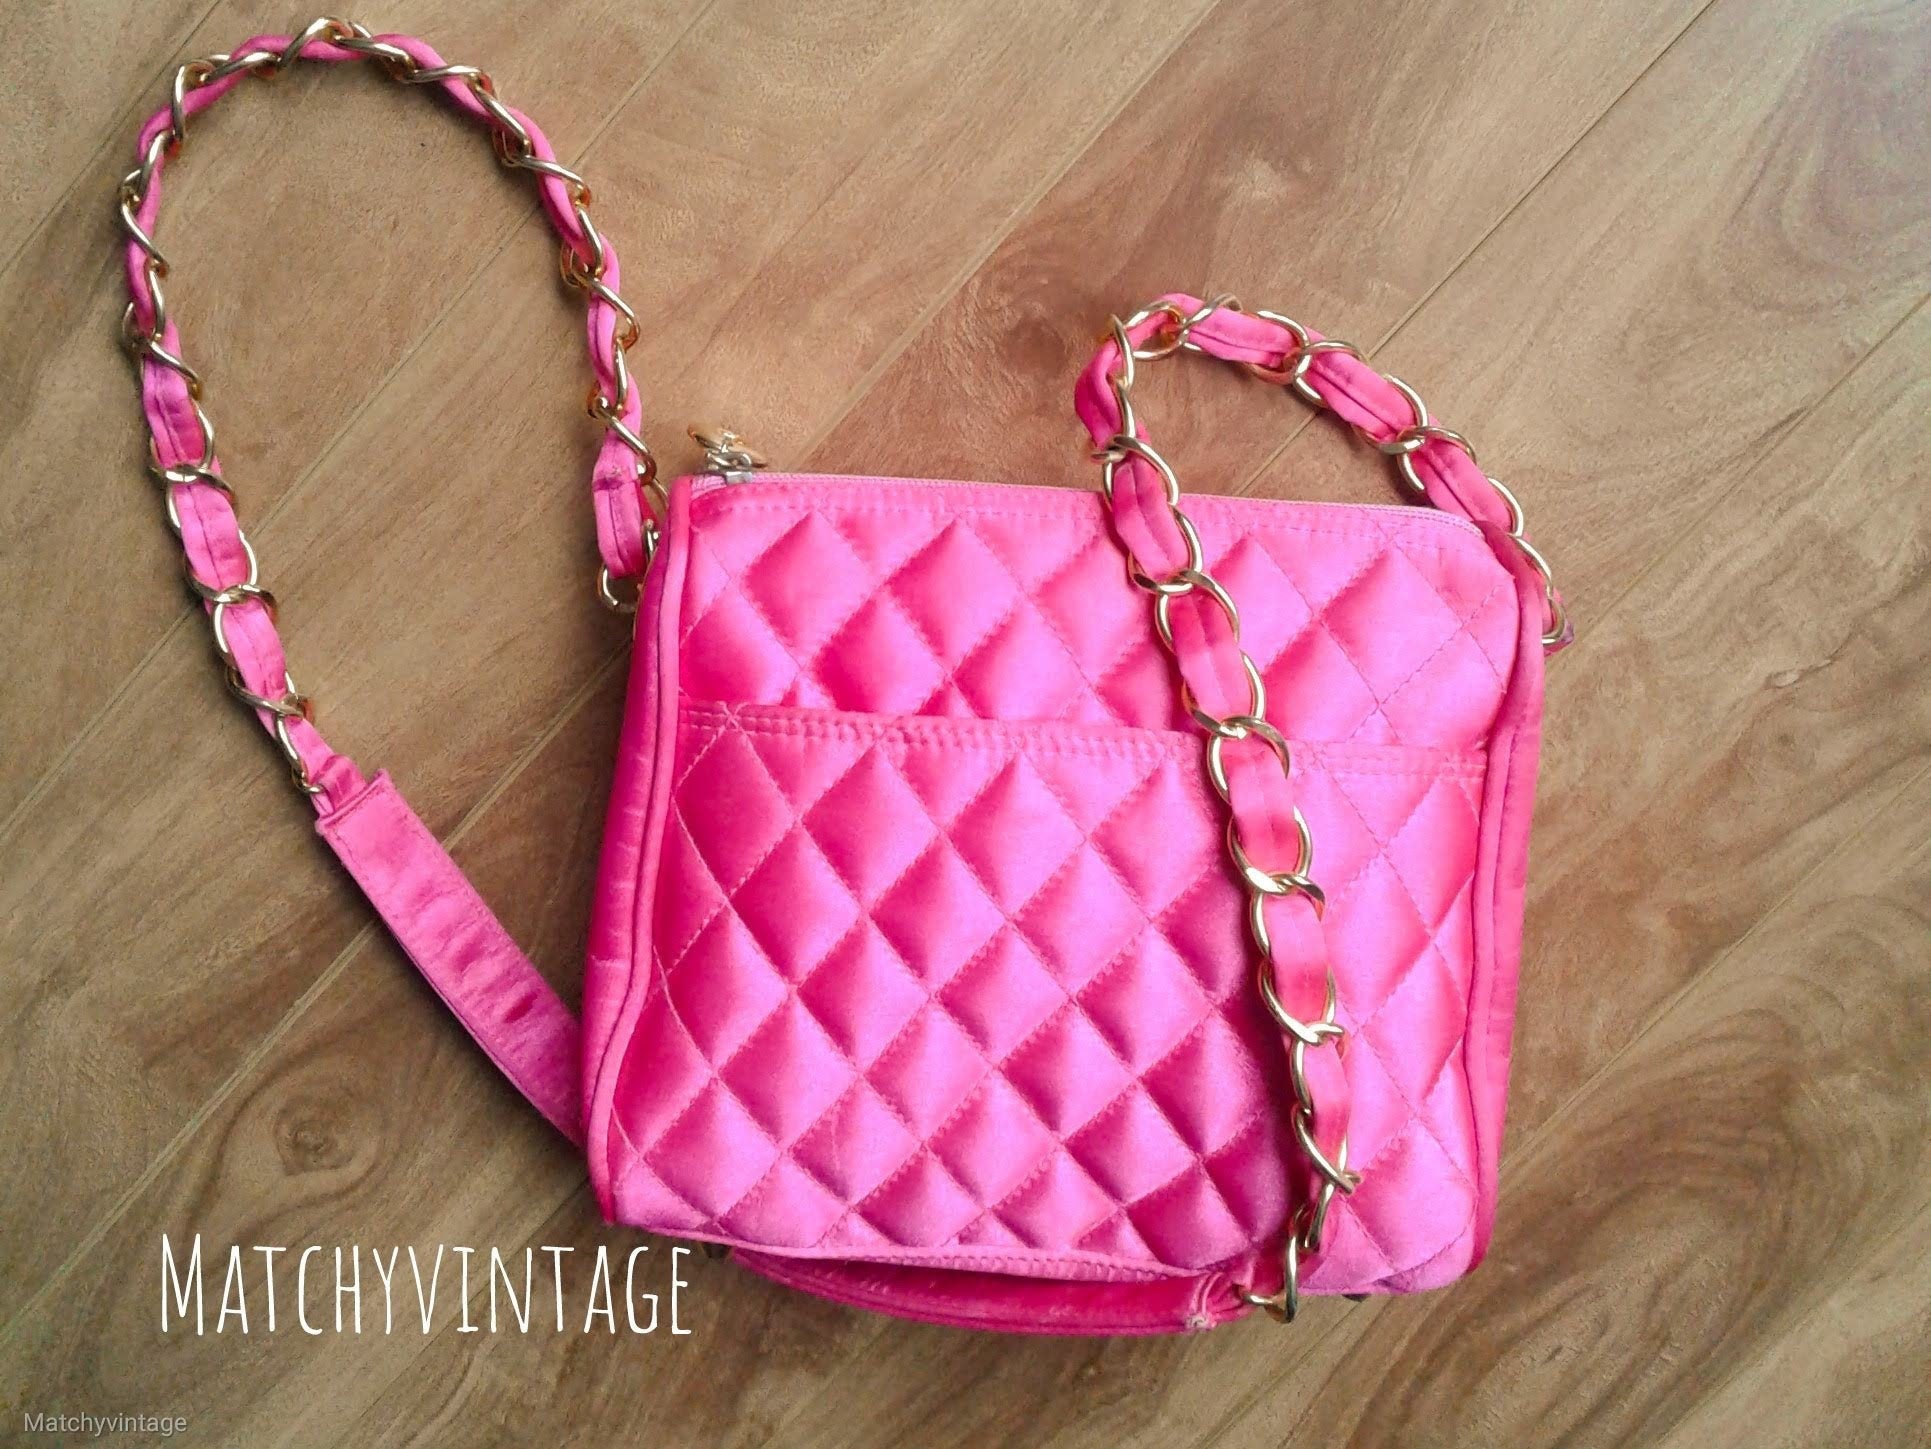 Omg CUTE Neon Pink Quilted Bag w Gold Chain Strap 90s | Etsy